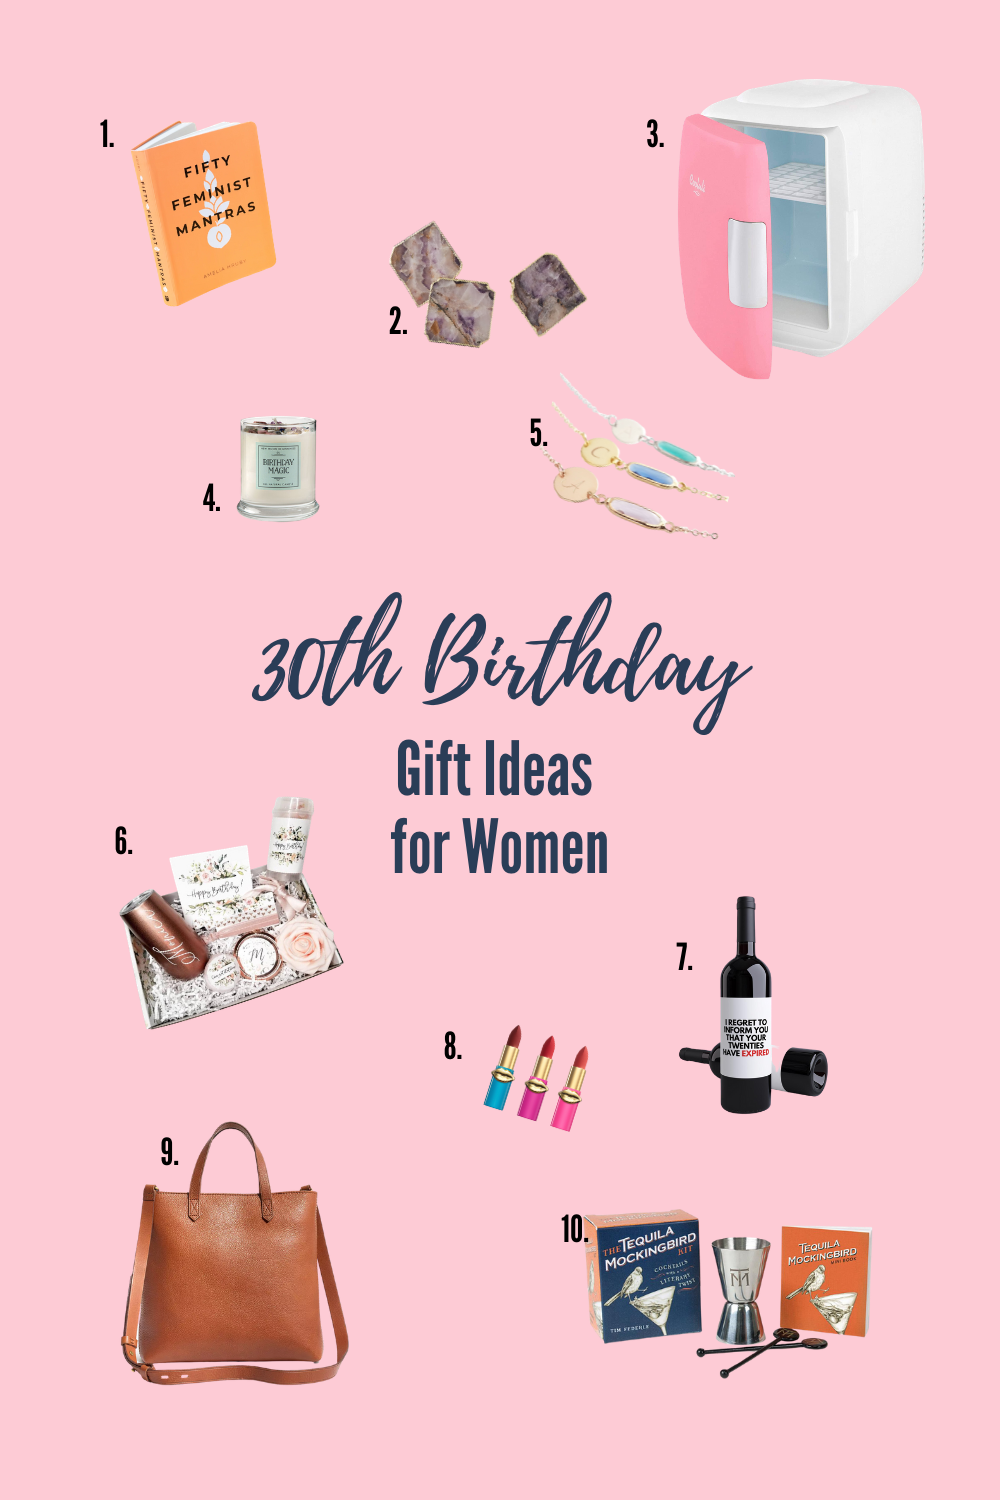 Gifts for 26, 27 and 28 year old women - Best Gifts For Women in Their  Twenties